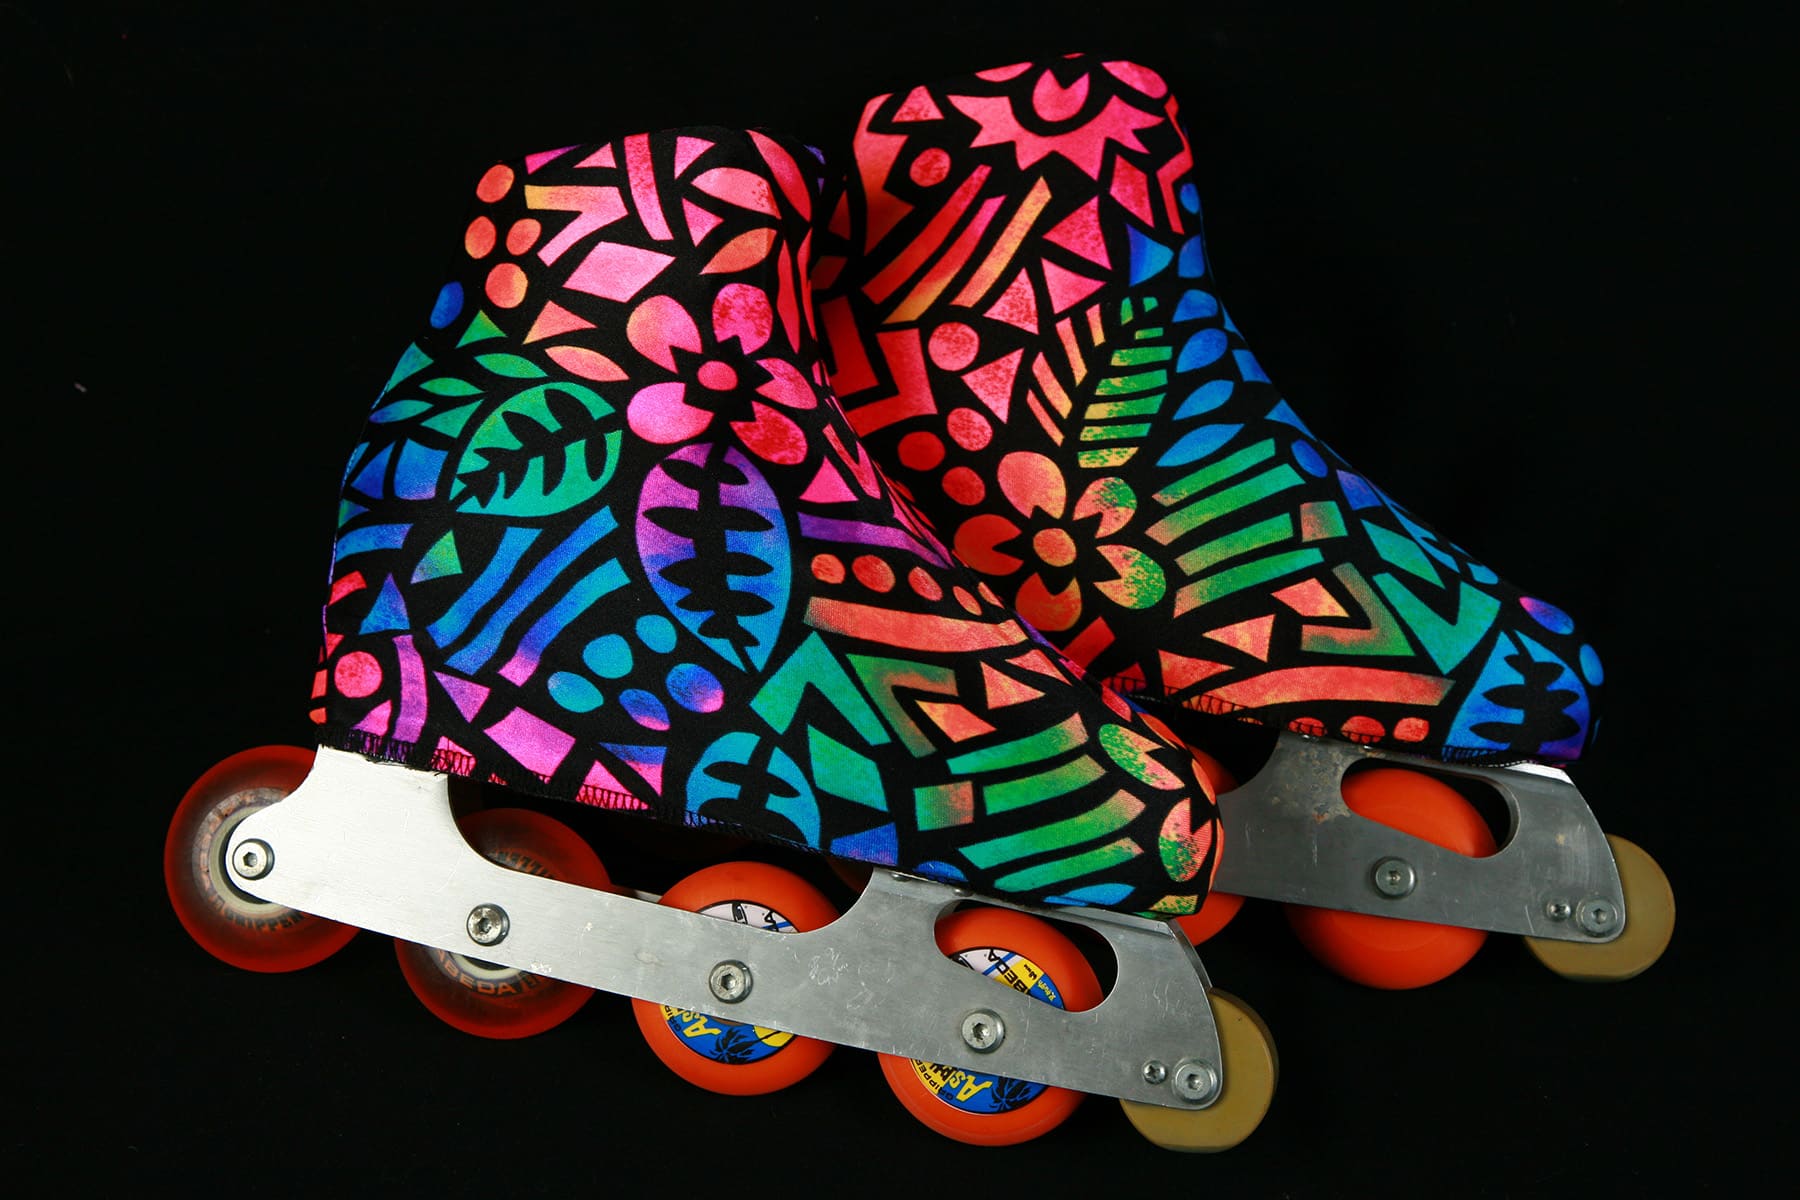 A pair of inline figure skates, in front of a black background. The skates have orange wheels, and are sporting skate covers with a brightly coloured, wild geometric pattern.